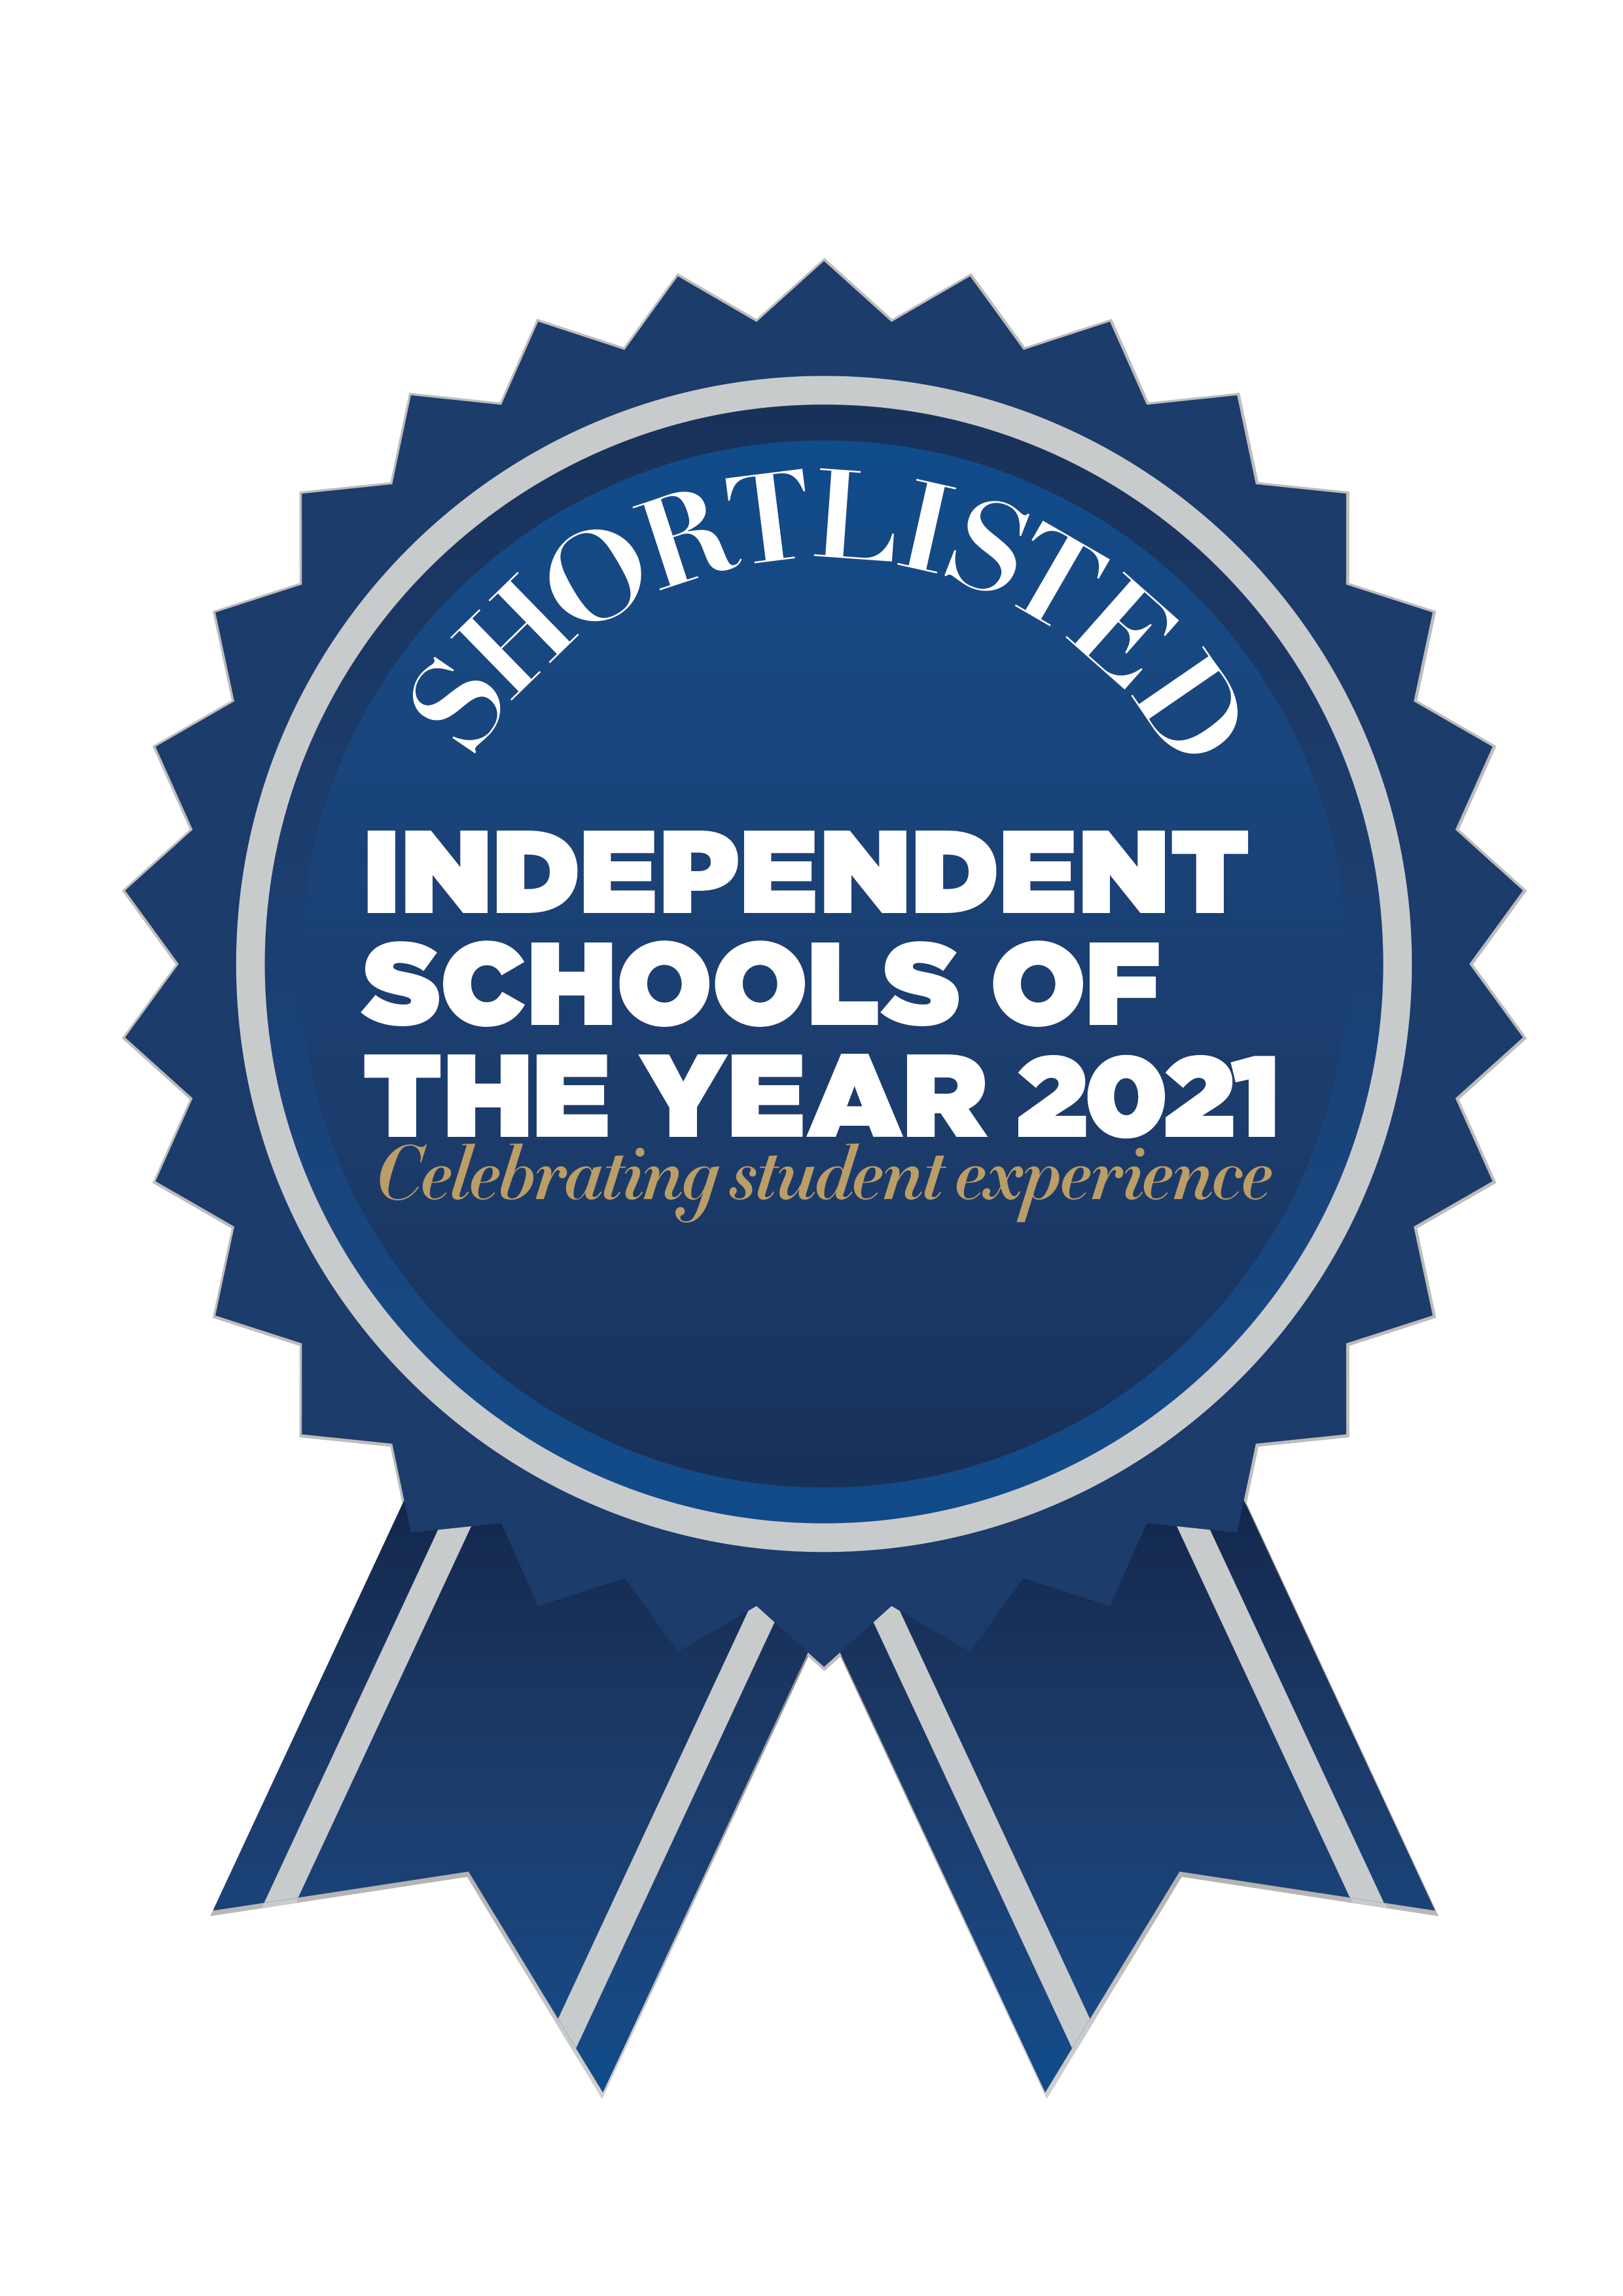 Shortlisted for the Sporting Achievement Category of the Independent Schools of the Year Awards